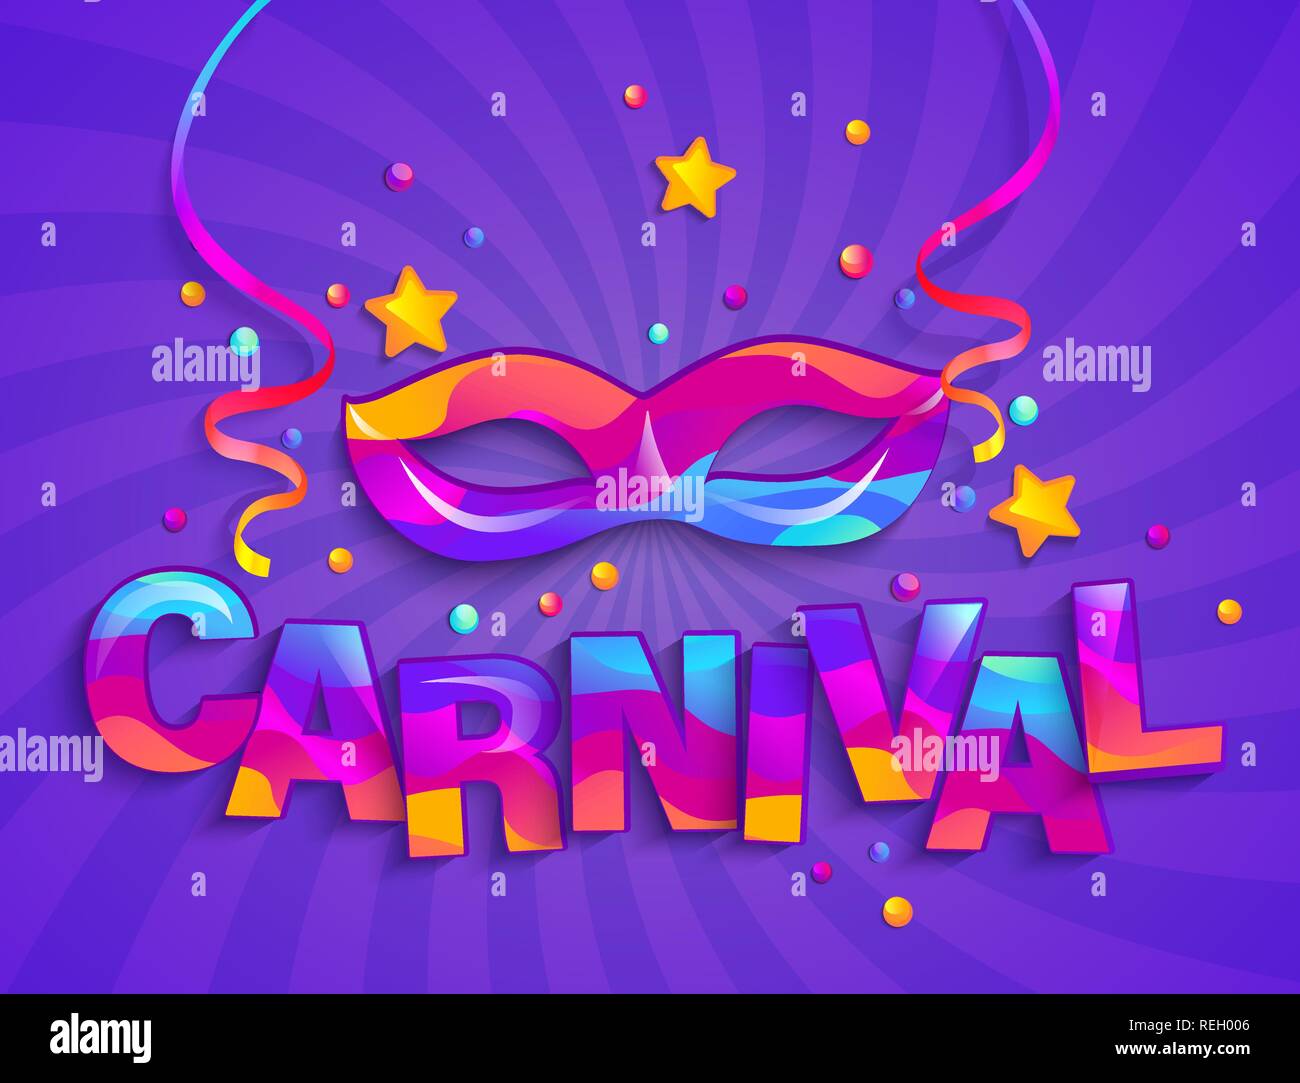 Colorful Mask for carnival festive on sunburst background. Traditional masque for carnaval, fesival,masquerade,parade.Template for design invitation card,flyer poster,banners. Vector illustration Stock Vector